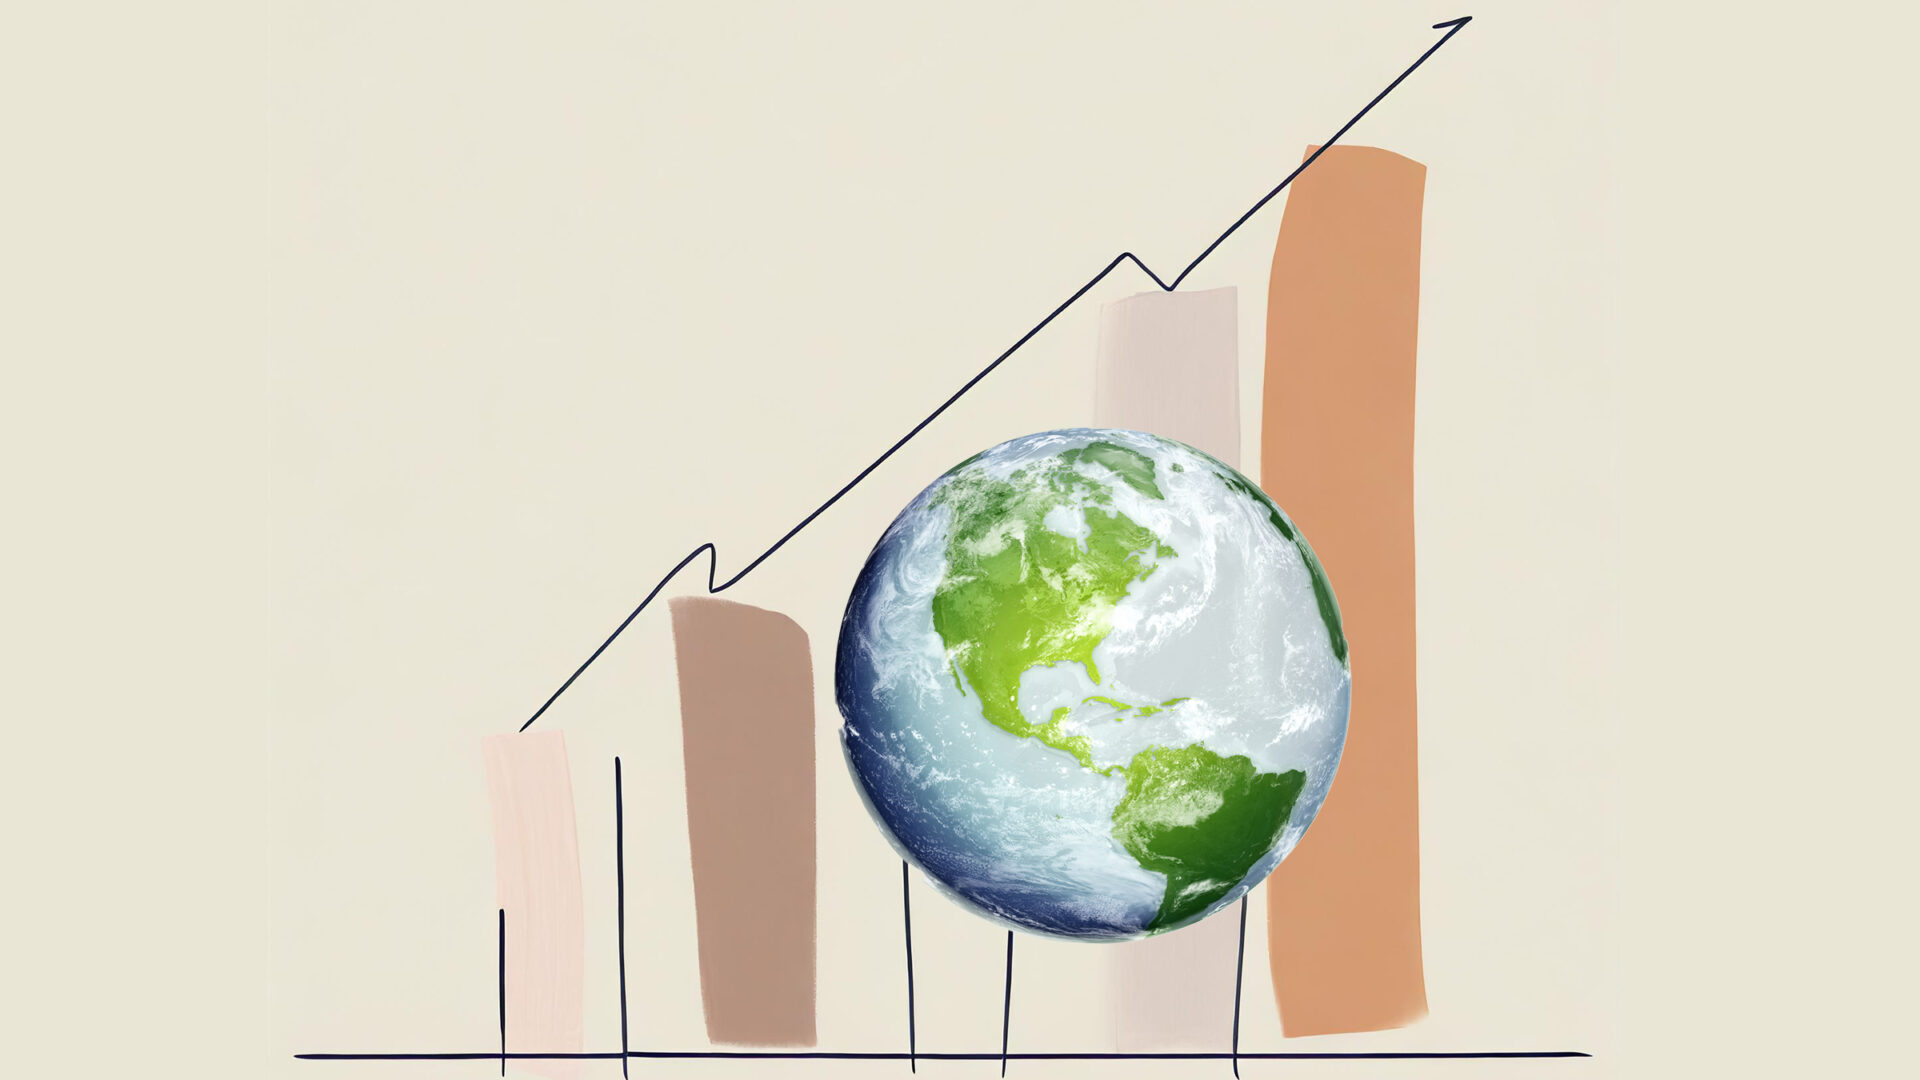 a globe in front of a bar graph that shows an upward trend